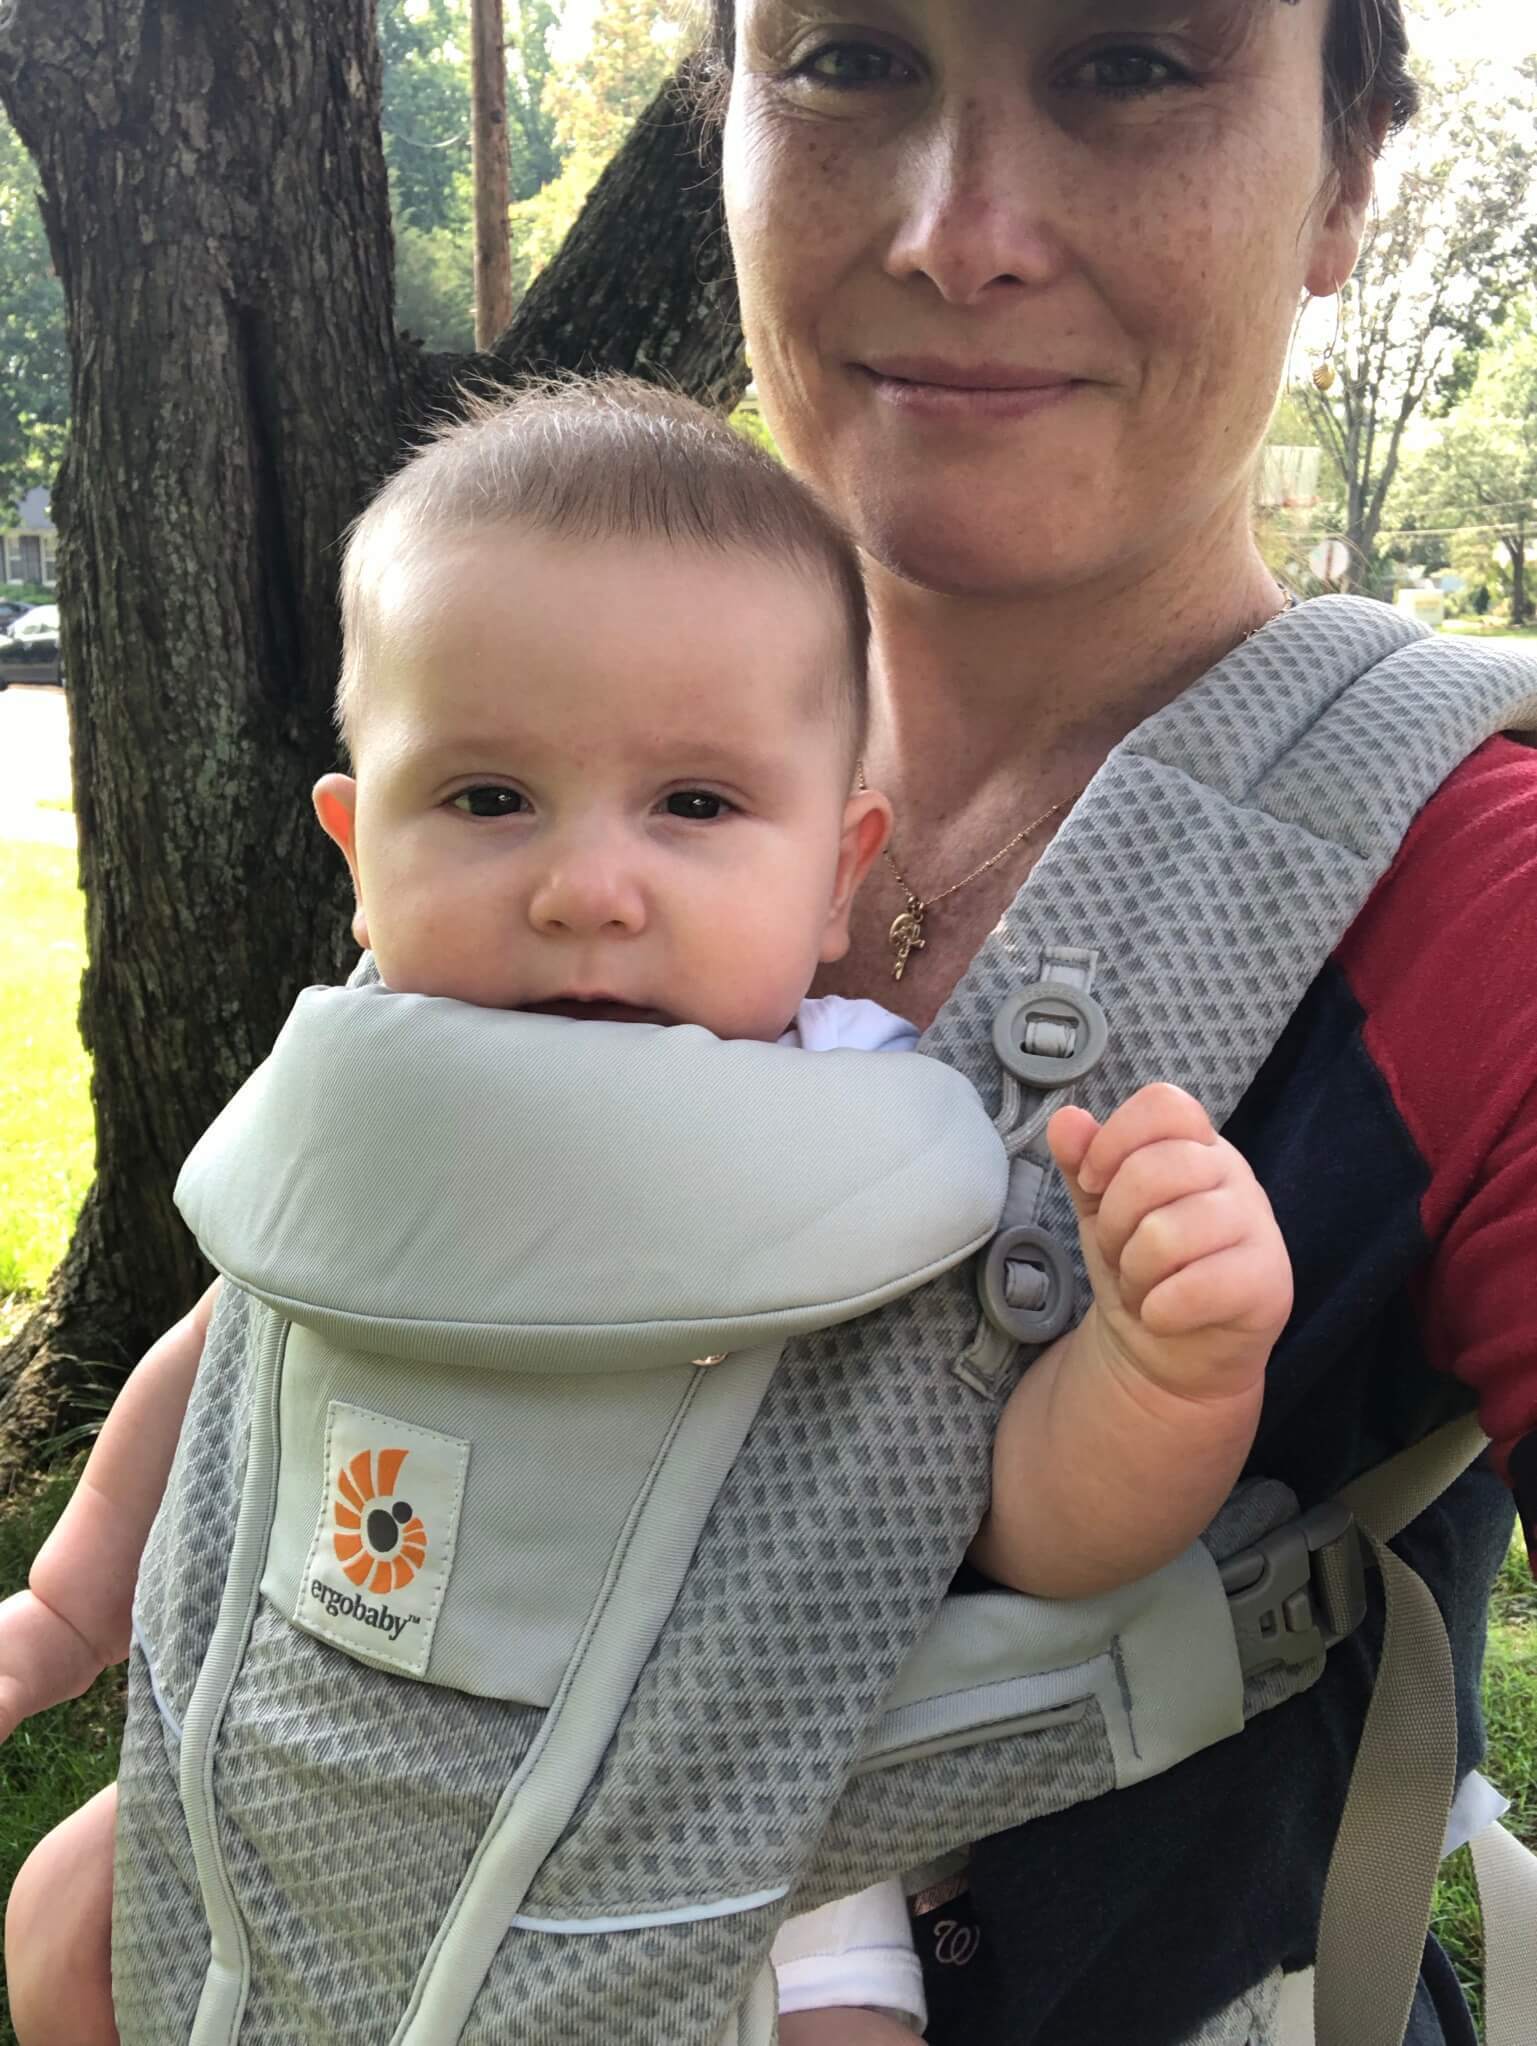 Ergobaby Omni Breeze Baby Carrier review - Baby carriers